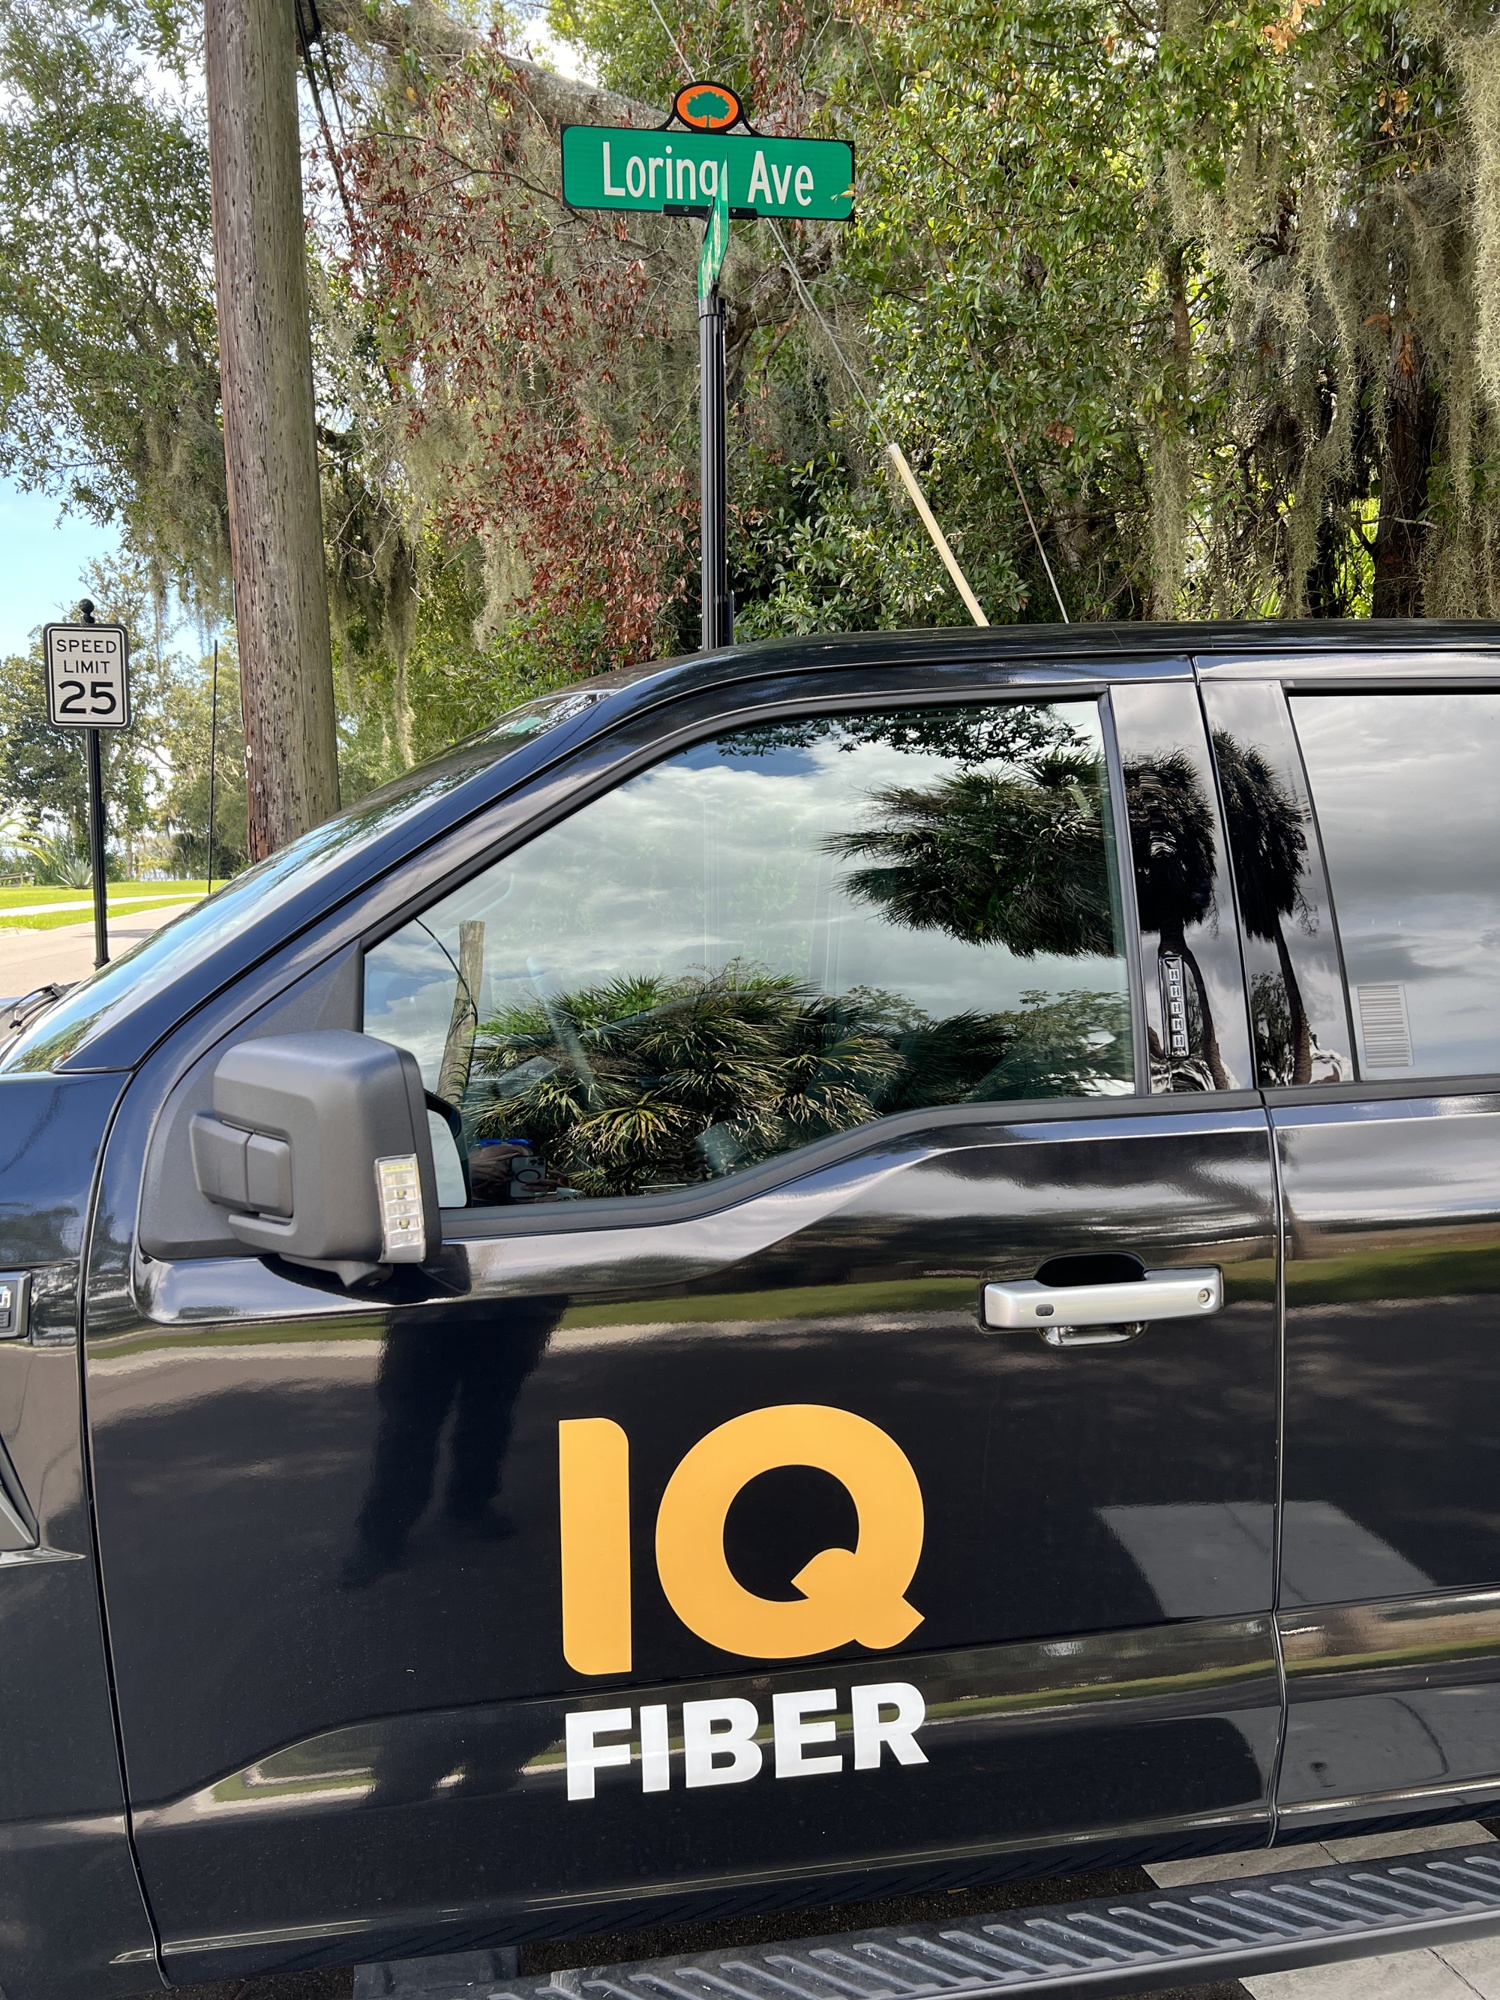 IQ Fiber company specializes in providing high-speed, fiber optic internet to subscribers in residential communities